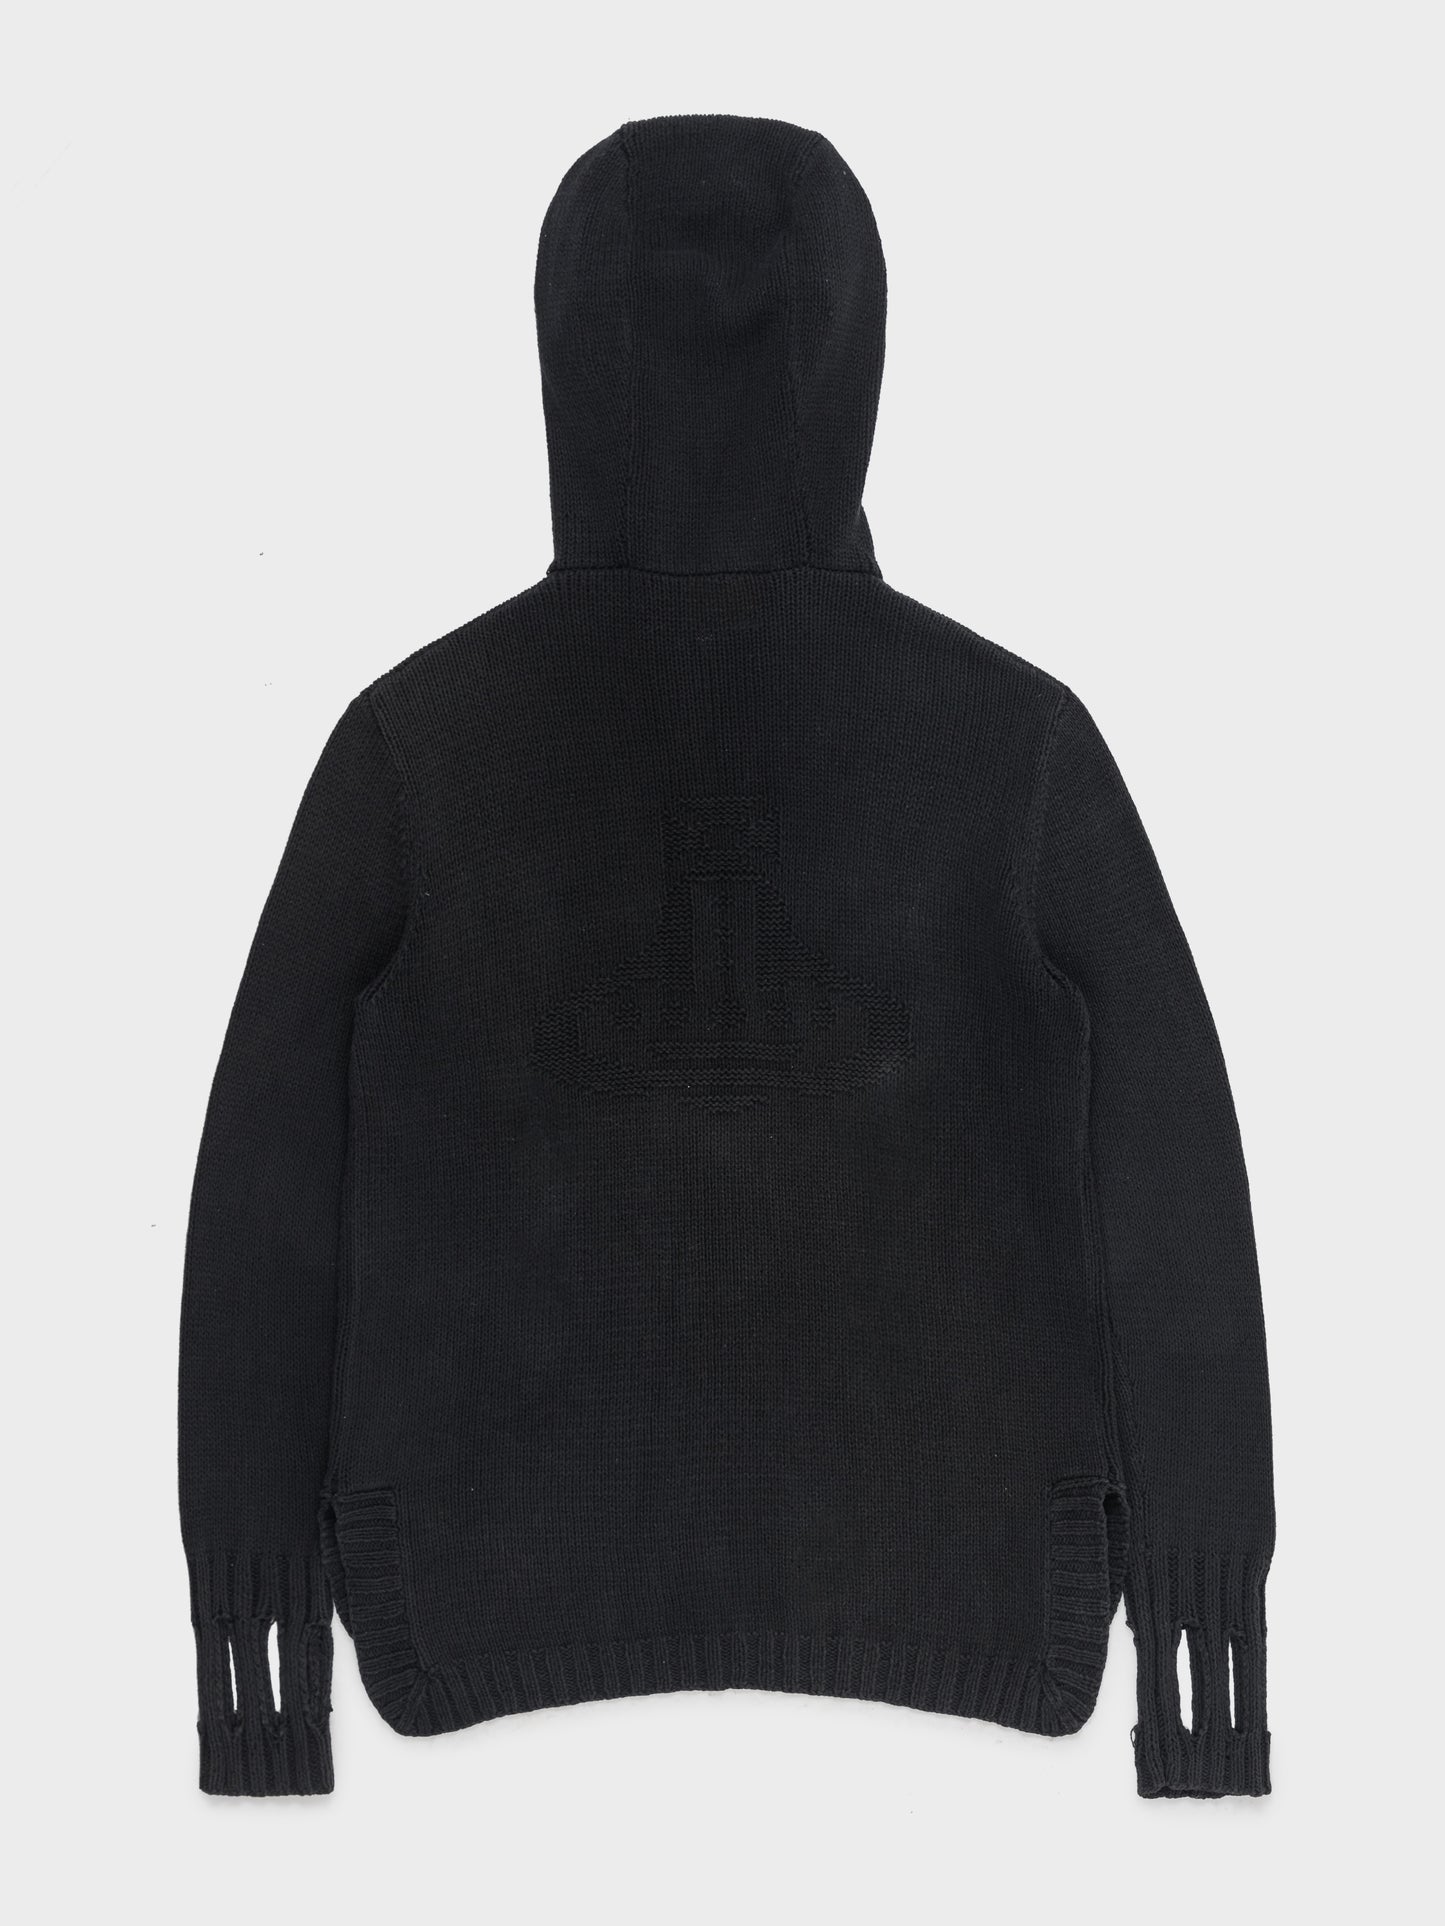 Cut-Out Knit Hoodie